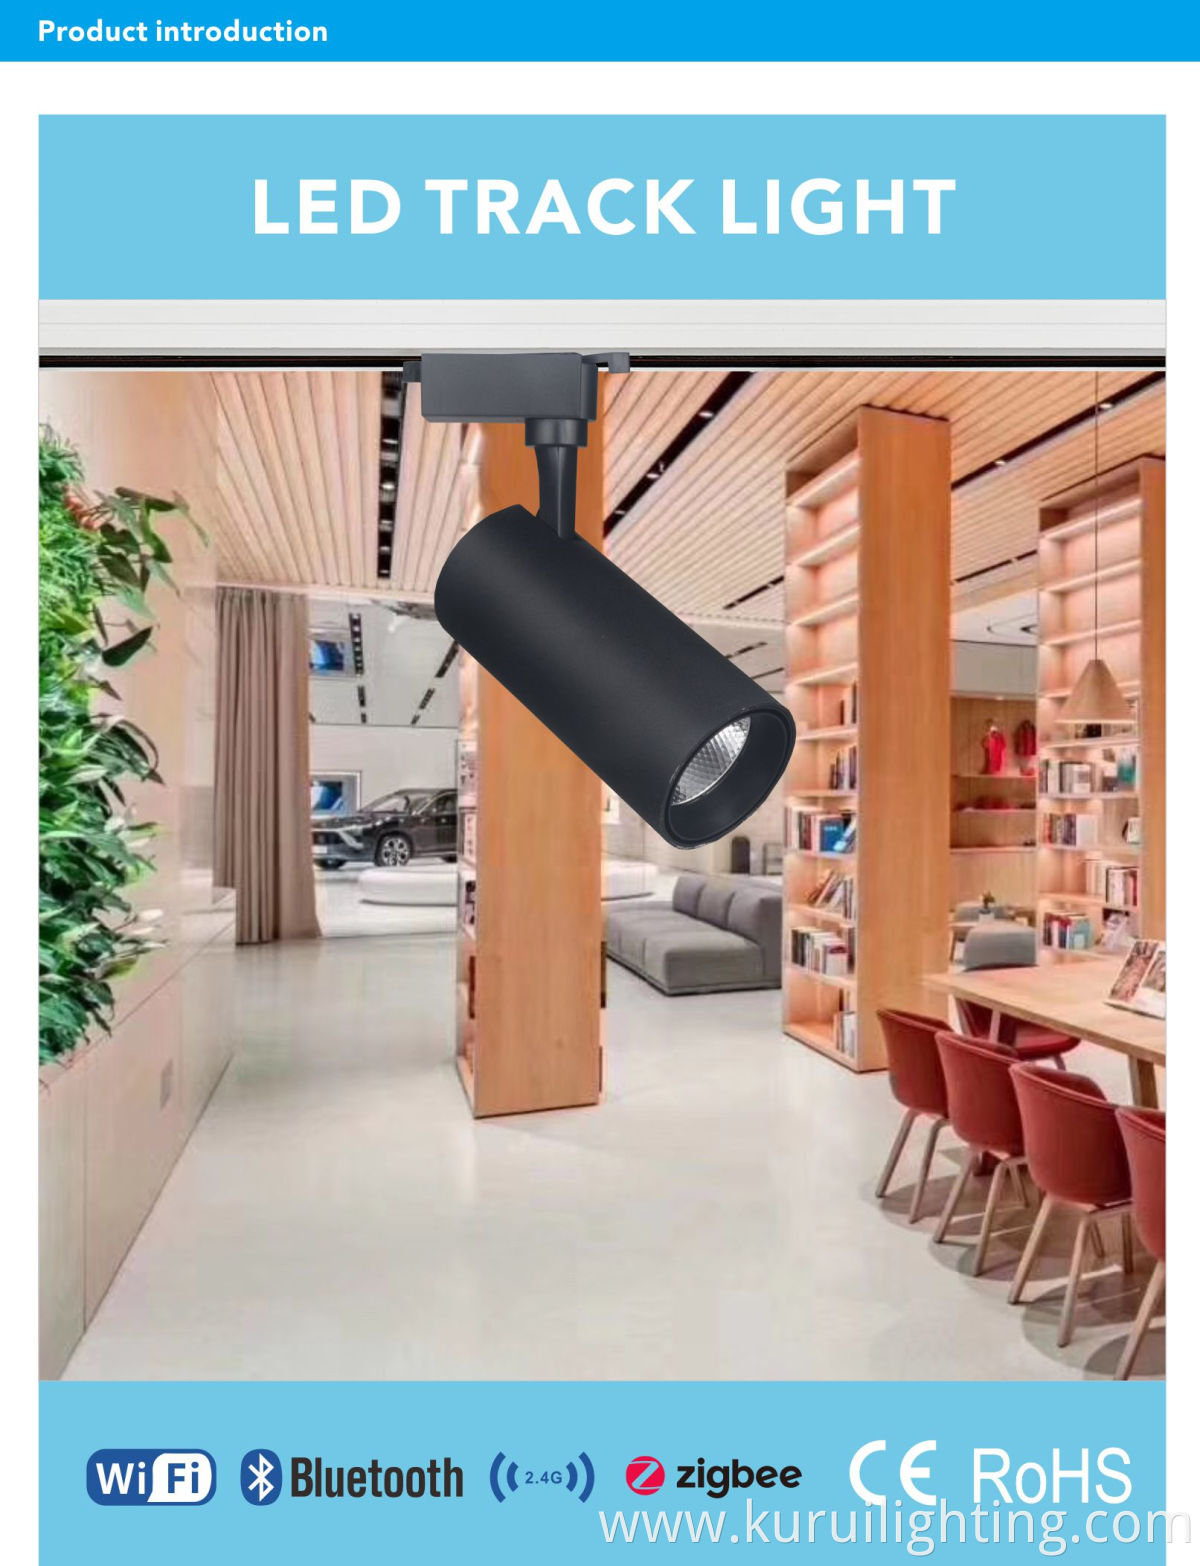 Hot sales competitive low price Wholesales Retail 40W COB 2 wires 3 Wires indoor Non-isolated Constant Current LED Track light